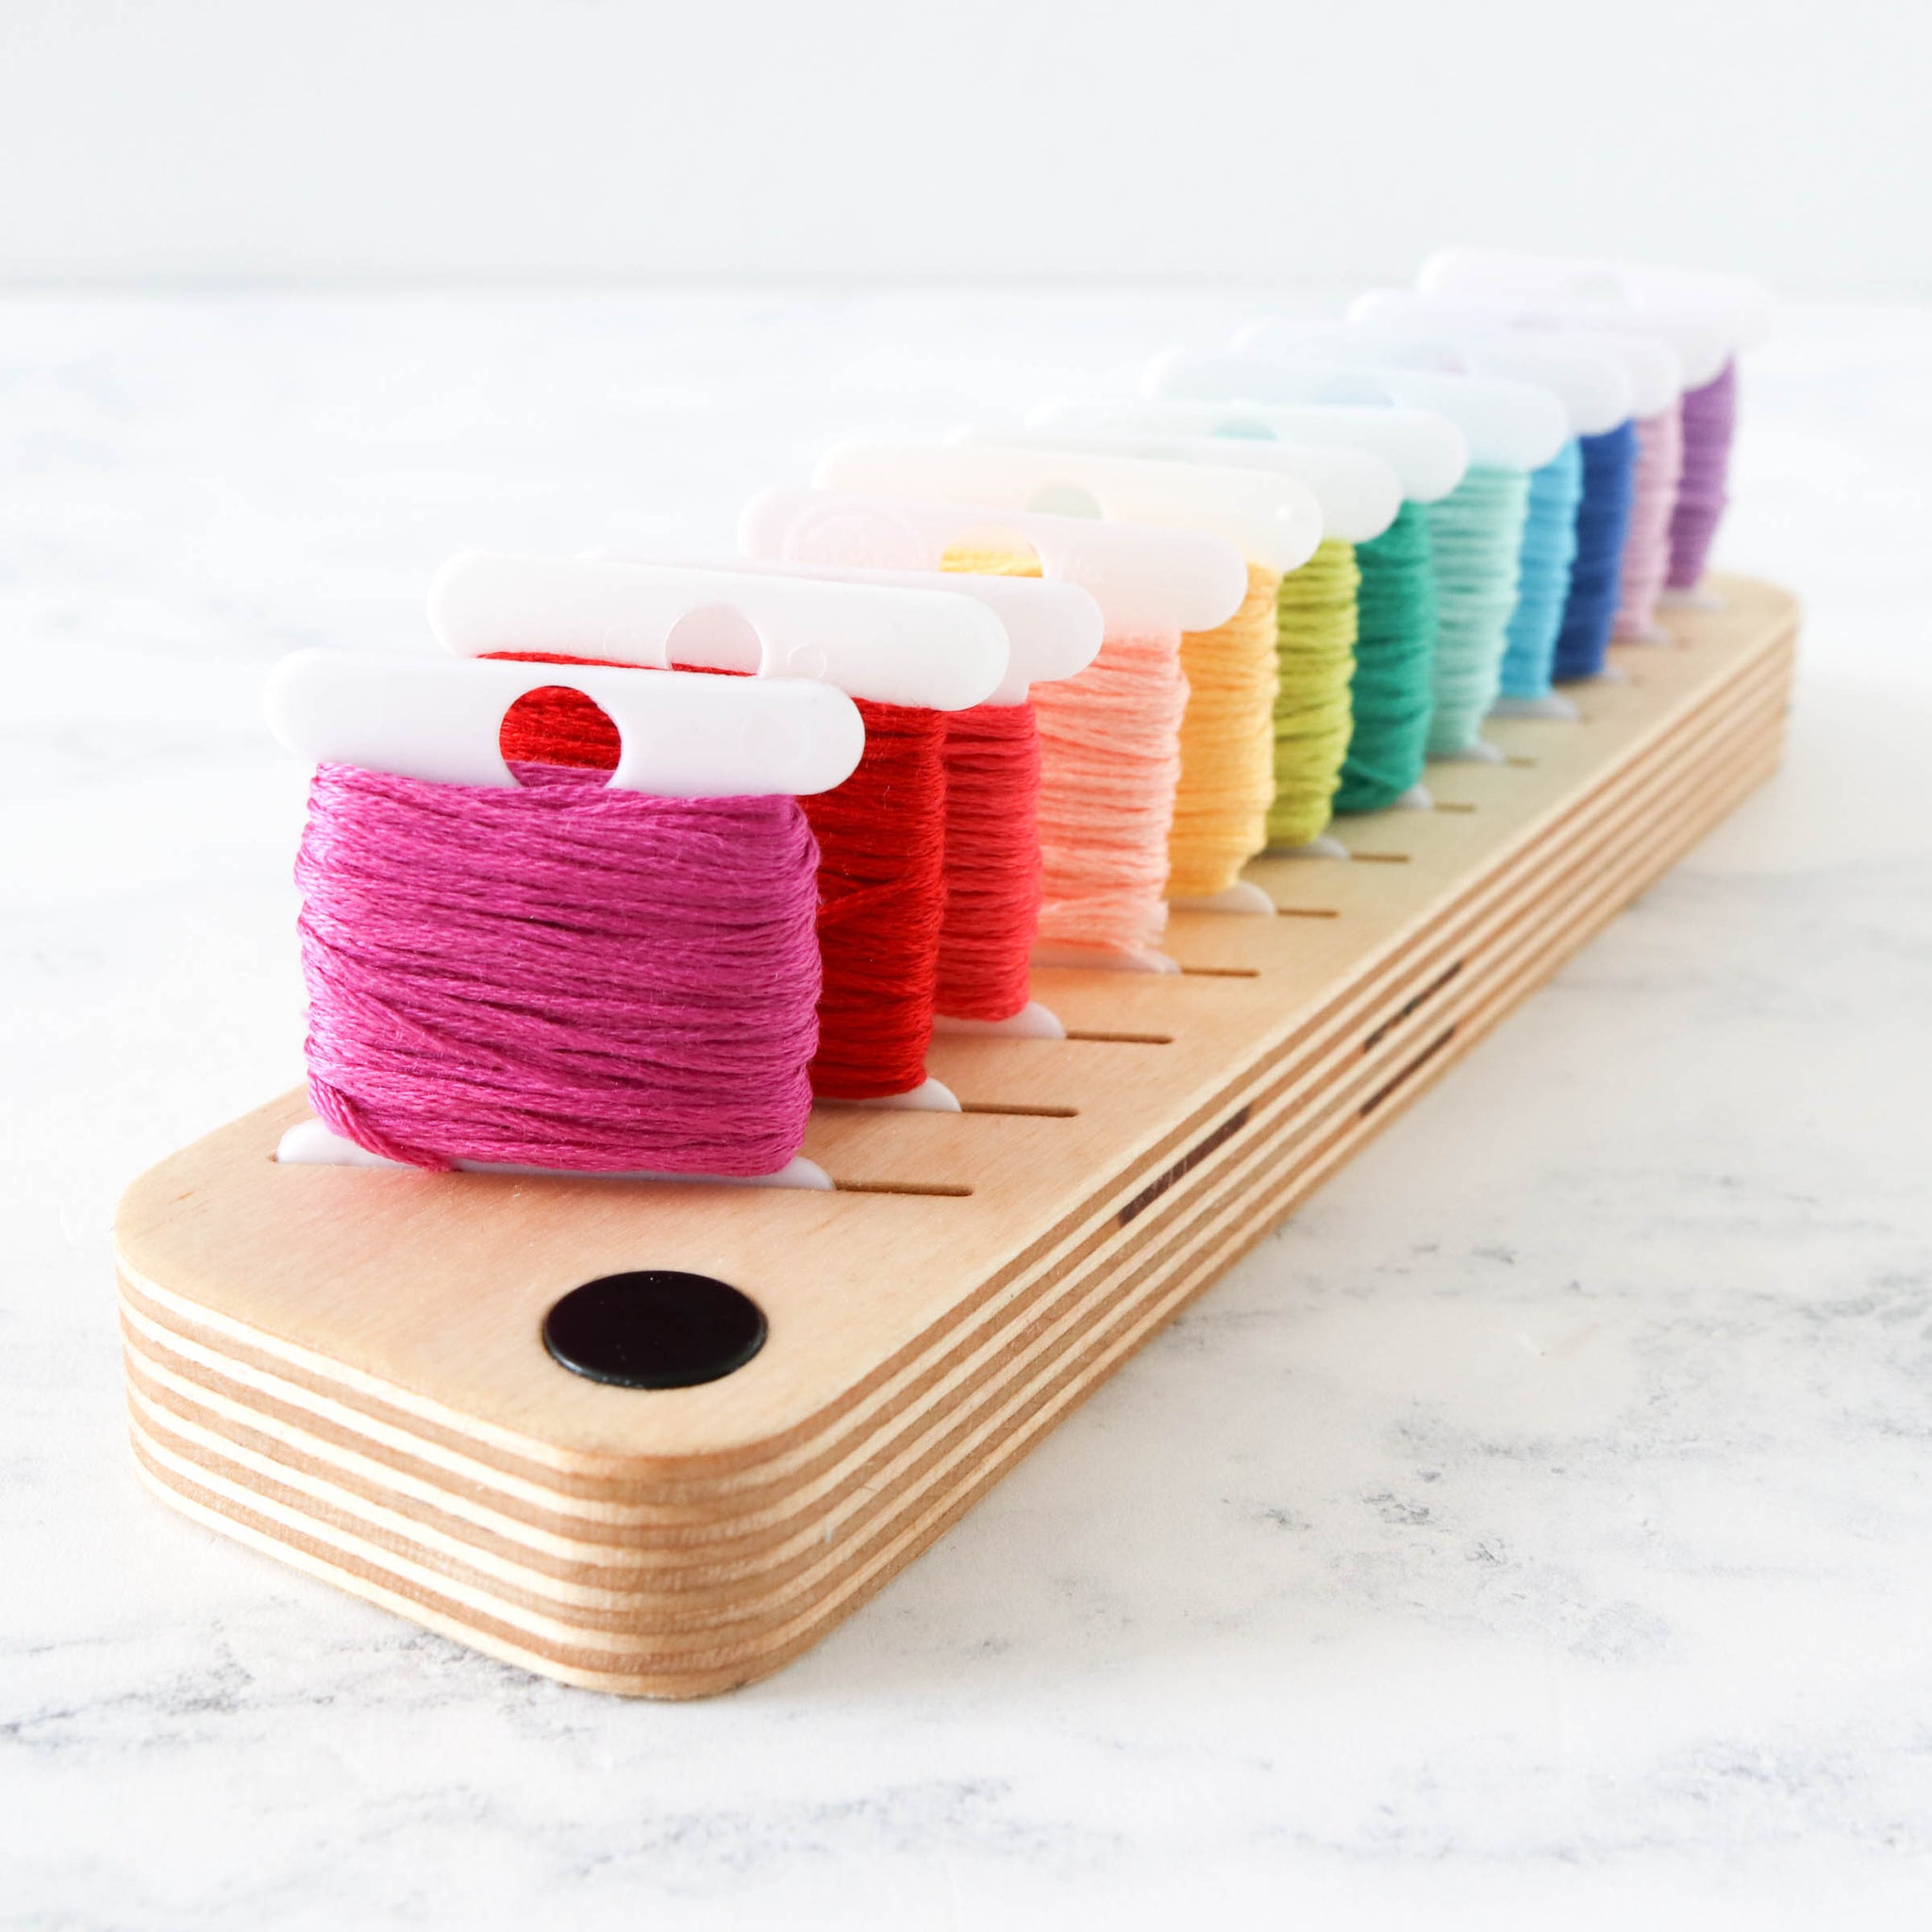 Bobbin Rack for Embroidery Floss With Needle Minder, Embroidery